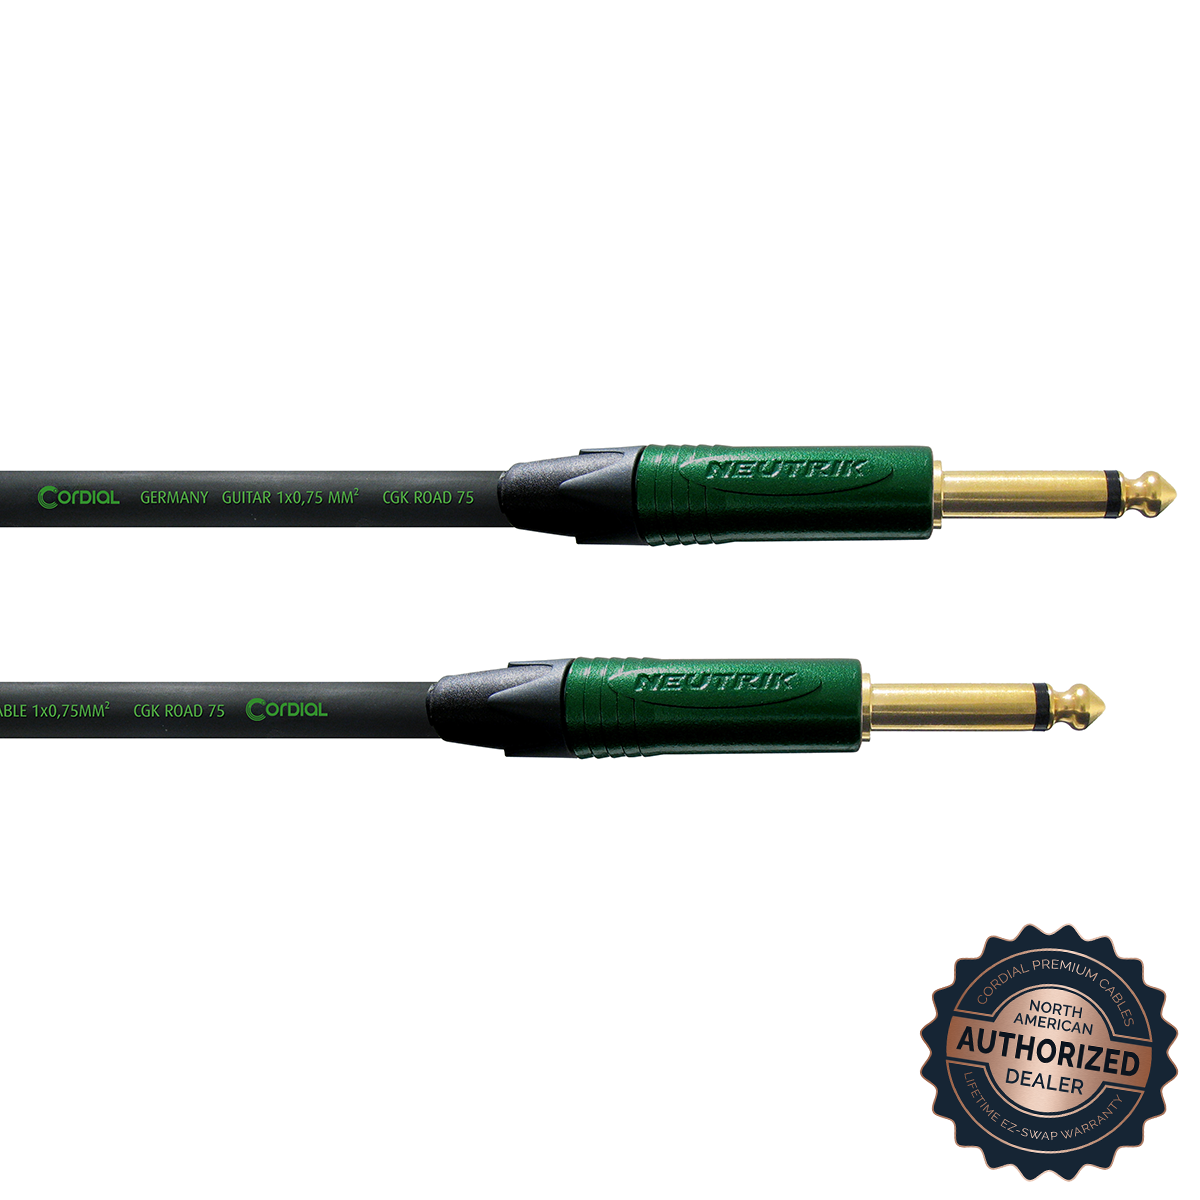 Cordial High-Copper Road-Series Instrument Cable; 30ft.

SKU: CRI 9 PP

1/4" TS Male to 1/4" TS Male; 30ft. 